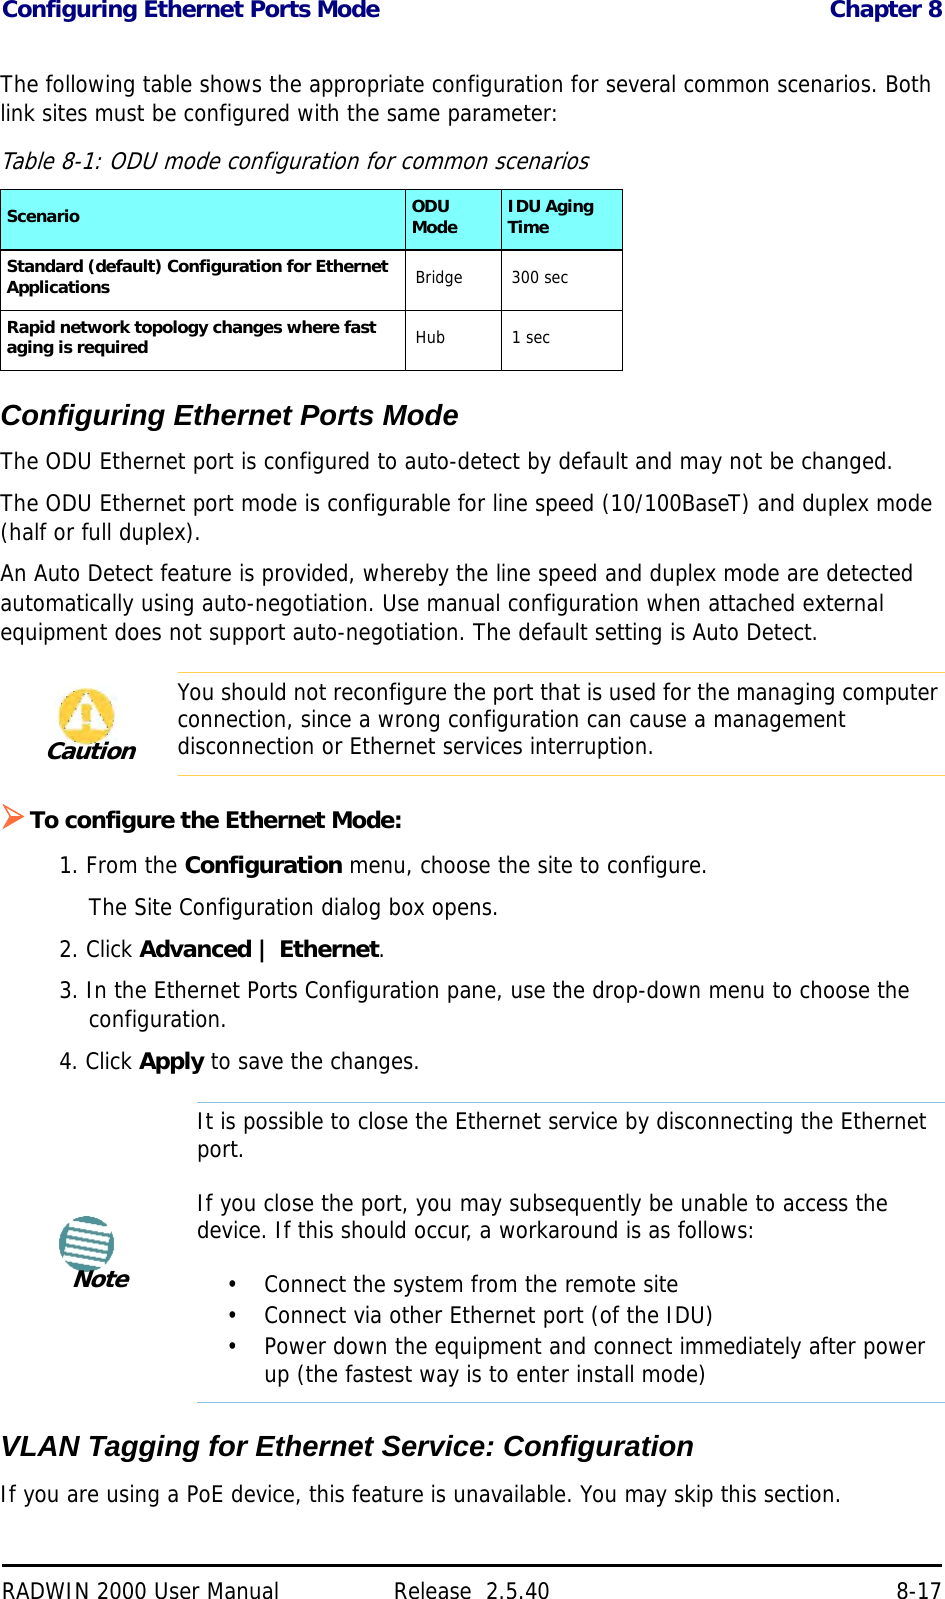 Configuring Ethernet Ports Mode Chapter 8RADWIN 2000 User Manual Release  2.5.40 8-17The following table shows the appropriate configuration for several common scenarios. Both link sites must be configured with the same parameter:Configuring Ethernet Ports ModeThe ODU Ethernet port is configured to auto-detect by default and may not be changed.The ODU Ethernet port mode is configurable for line speed (10/100BaseT) and duplex mode (half or full duplex).An Auto Detect feature is provided, whereby the line speed and duplex mode are detected automatically using auto-negotiation. Use manual configuration when attached external equipment does not support auto-negotiation. The default setting is Auto Detect.To configure the Ethernet Mode:1. From the Configuration menu, choose the site to configure.The Site Configuration dialog box opens.2. Click Advanced | Ethernet.3. In the Ethernet Ports Configuration pane, use the drop-down menu to choose the configuration.4. Click Apply to save the changes.VLAN Tagging for Ethernet Service: ConfigurationIf you are using a PoE device, this feature is unavailable. You may skip this section.Table 8-1: ODU mode configuration for common scenariosScenario ODU Mode IDU Aging TimeStandard (default) Configuration for Ethernet Applications Bridge 300 secRapid network topology changes where fast aging is required Hub 1 secCautionYou should not reconfigure the port that is used for the managing computer connection, since a wrong configuration can cause a management disconnection or Ethernet services interruption.NoteIt is possible to close the Ethernet service by disconnecting the Ethernet port.If you close the port, you may subsequently be unable to access the device. If this should occur, a workaround is as follows:• Connect the system from the remote site• Connect via other Ethernet port (of the IDU)• Power down the equipment and connect immediately after power up (the fastest way is to enter install mode)